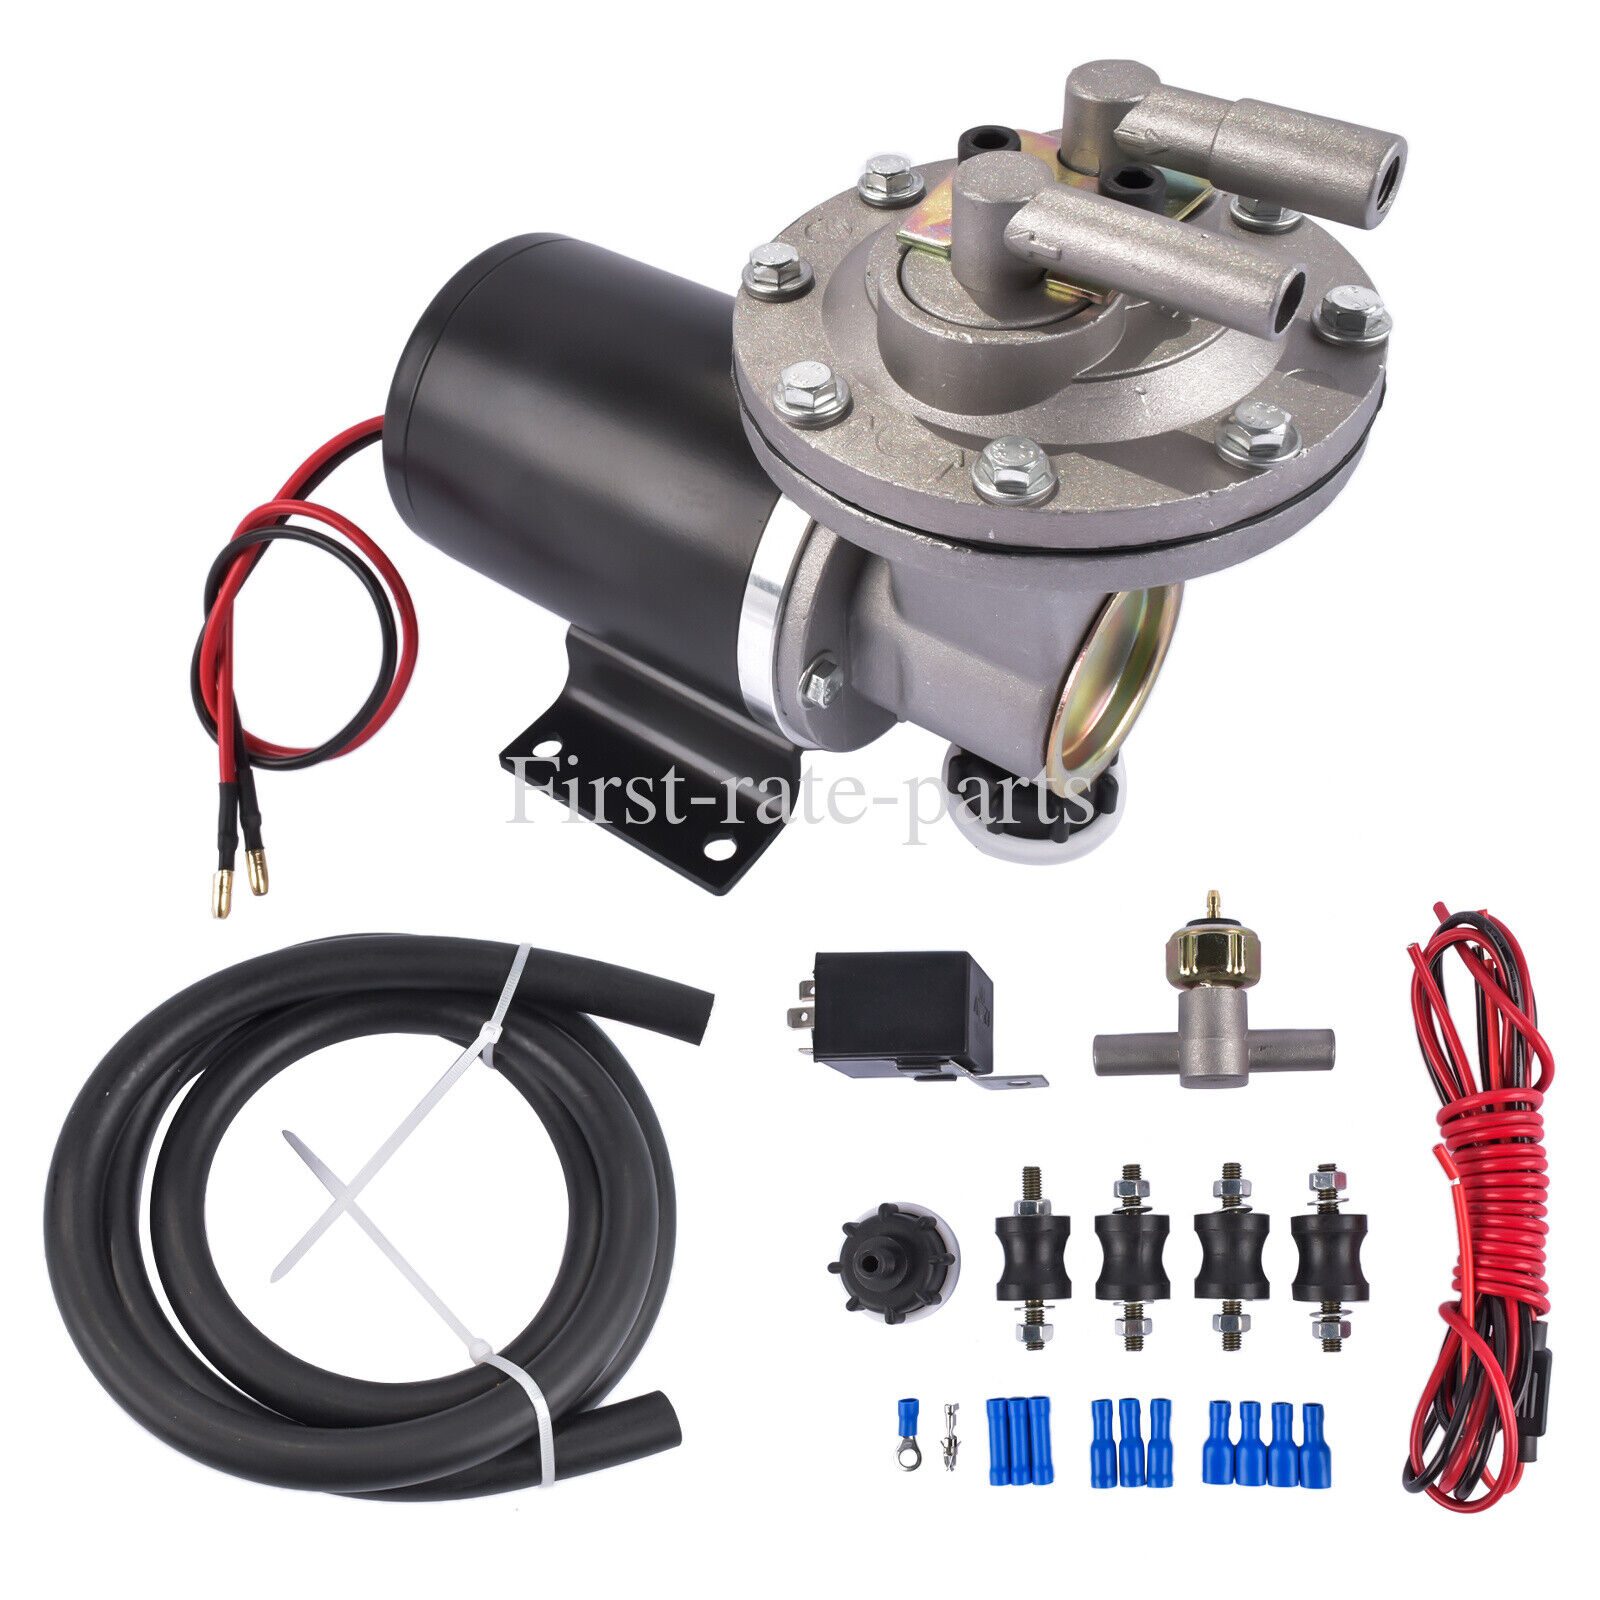 NEW 12V Electric Vacuum Pump Kit 28146 for Brake Systems 18